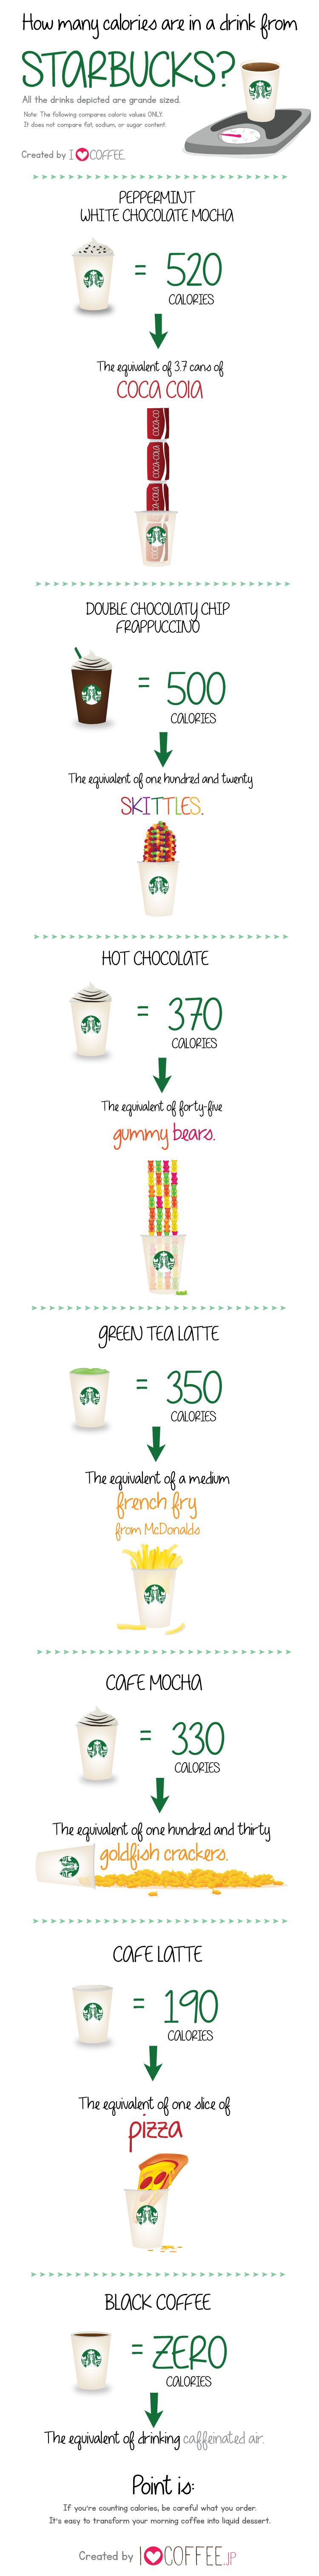 How Many Calories Are In A Drink From Starbucks Infographic